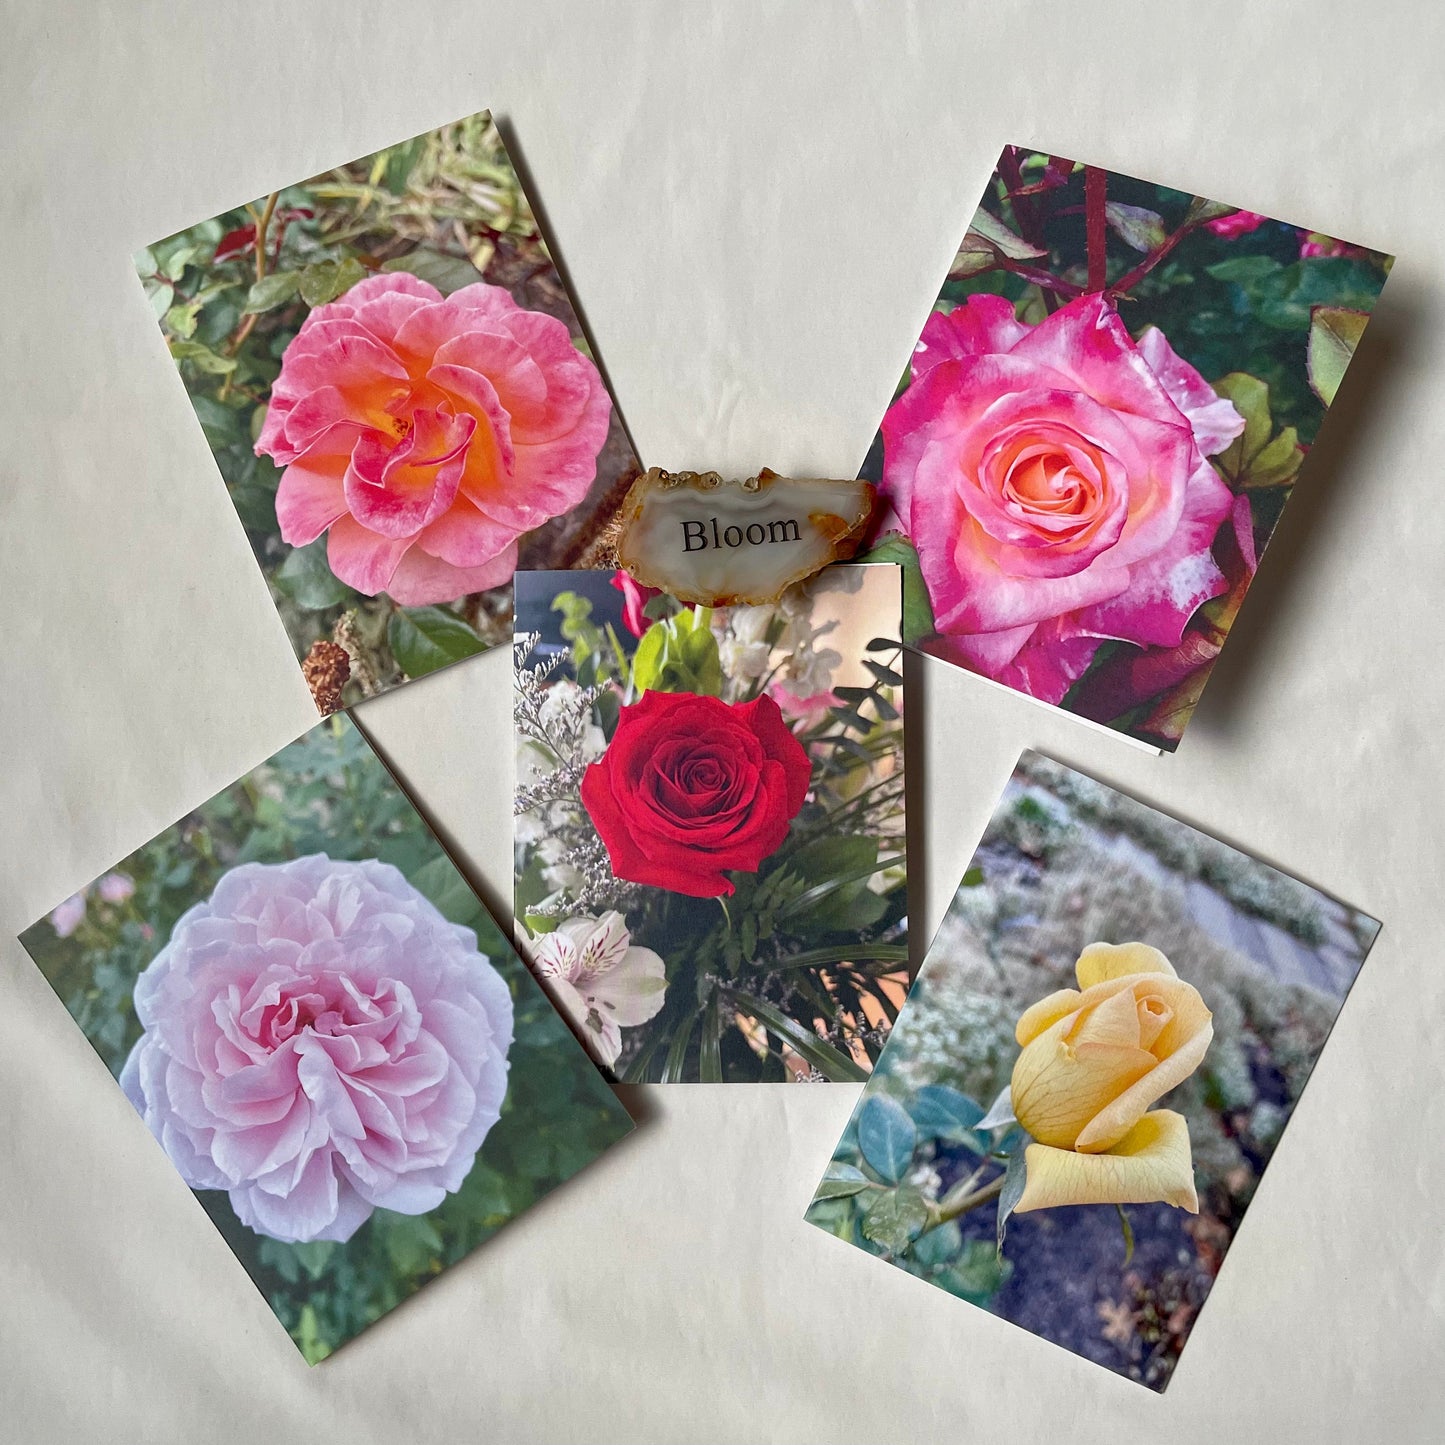 Rose Collection - Assorted Roses Original Nature Photography Greeting Card Boxed Set of 5 with Kraft Envelopes